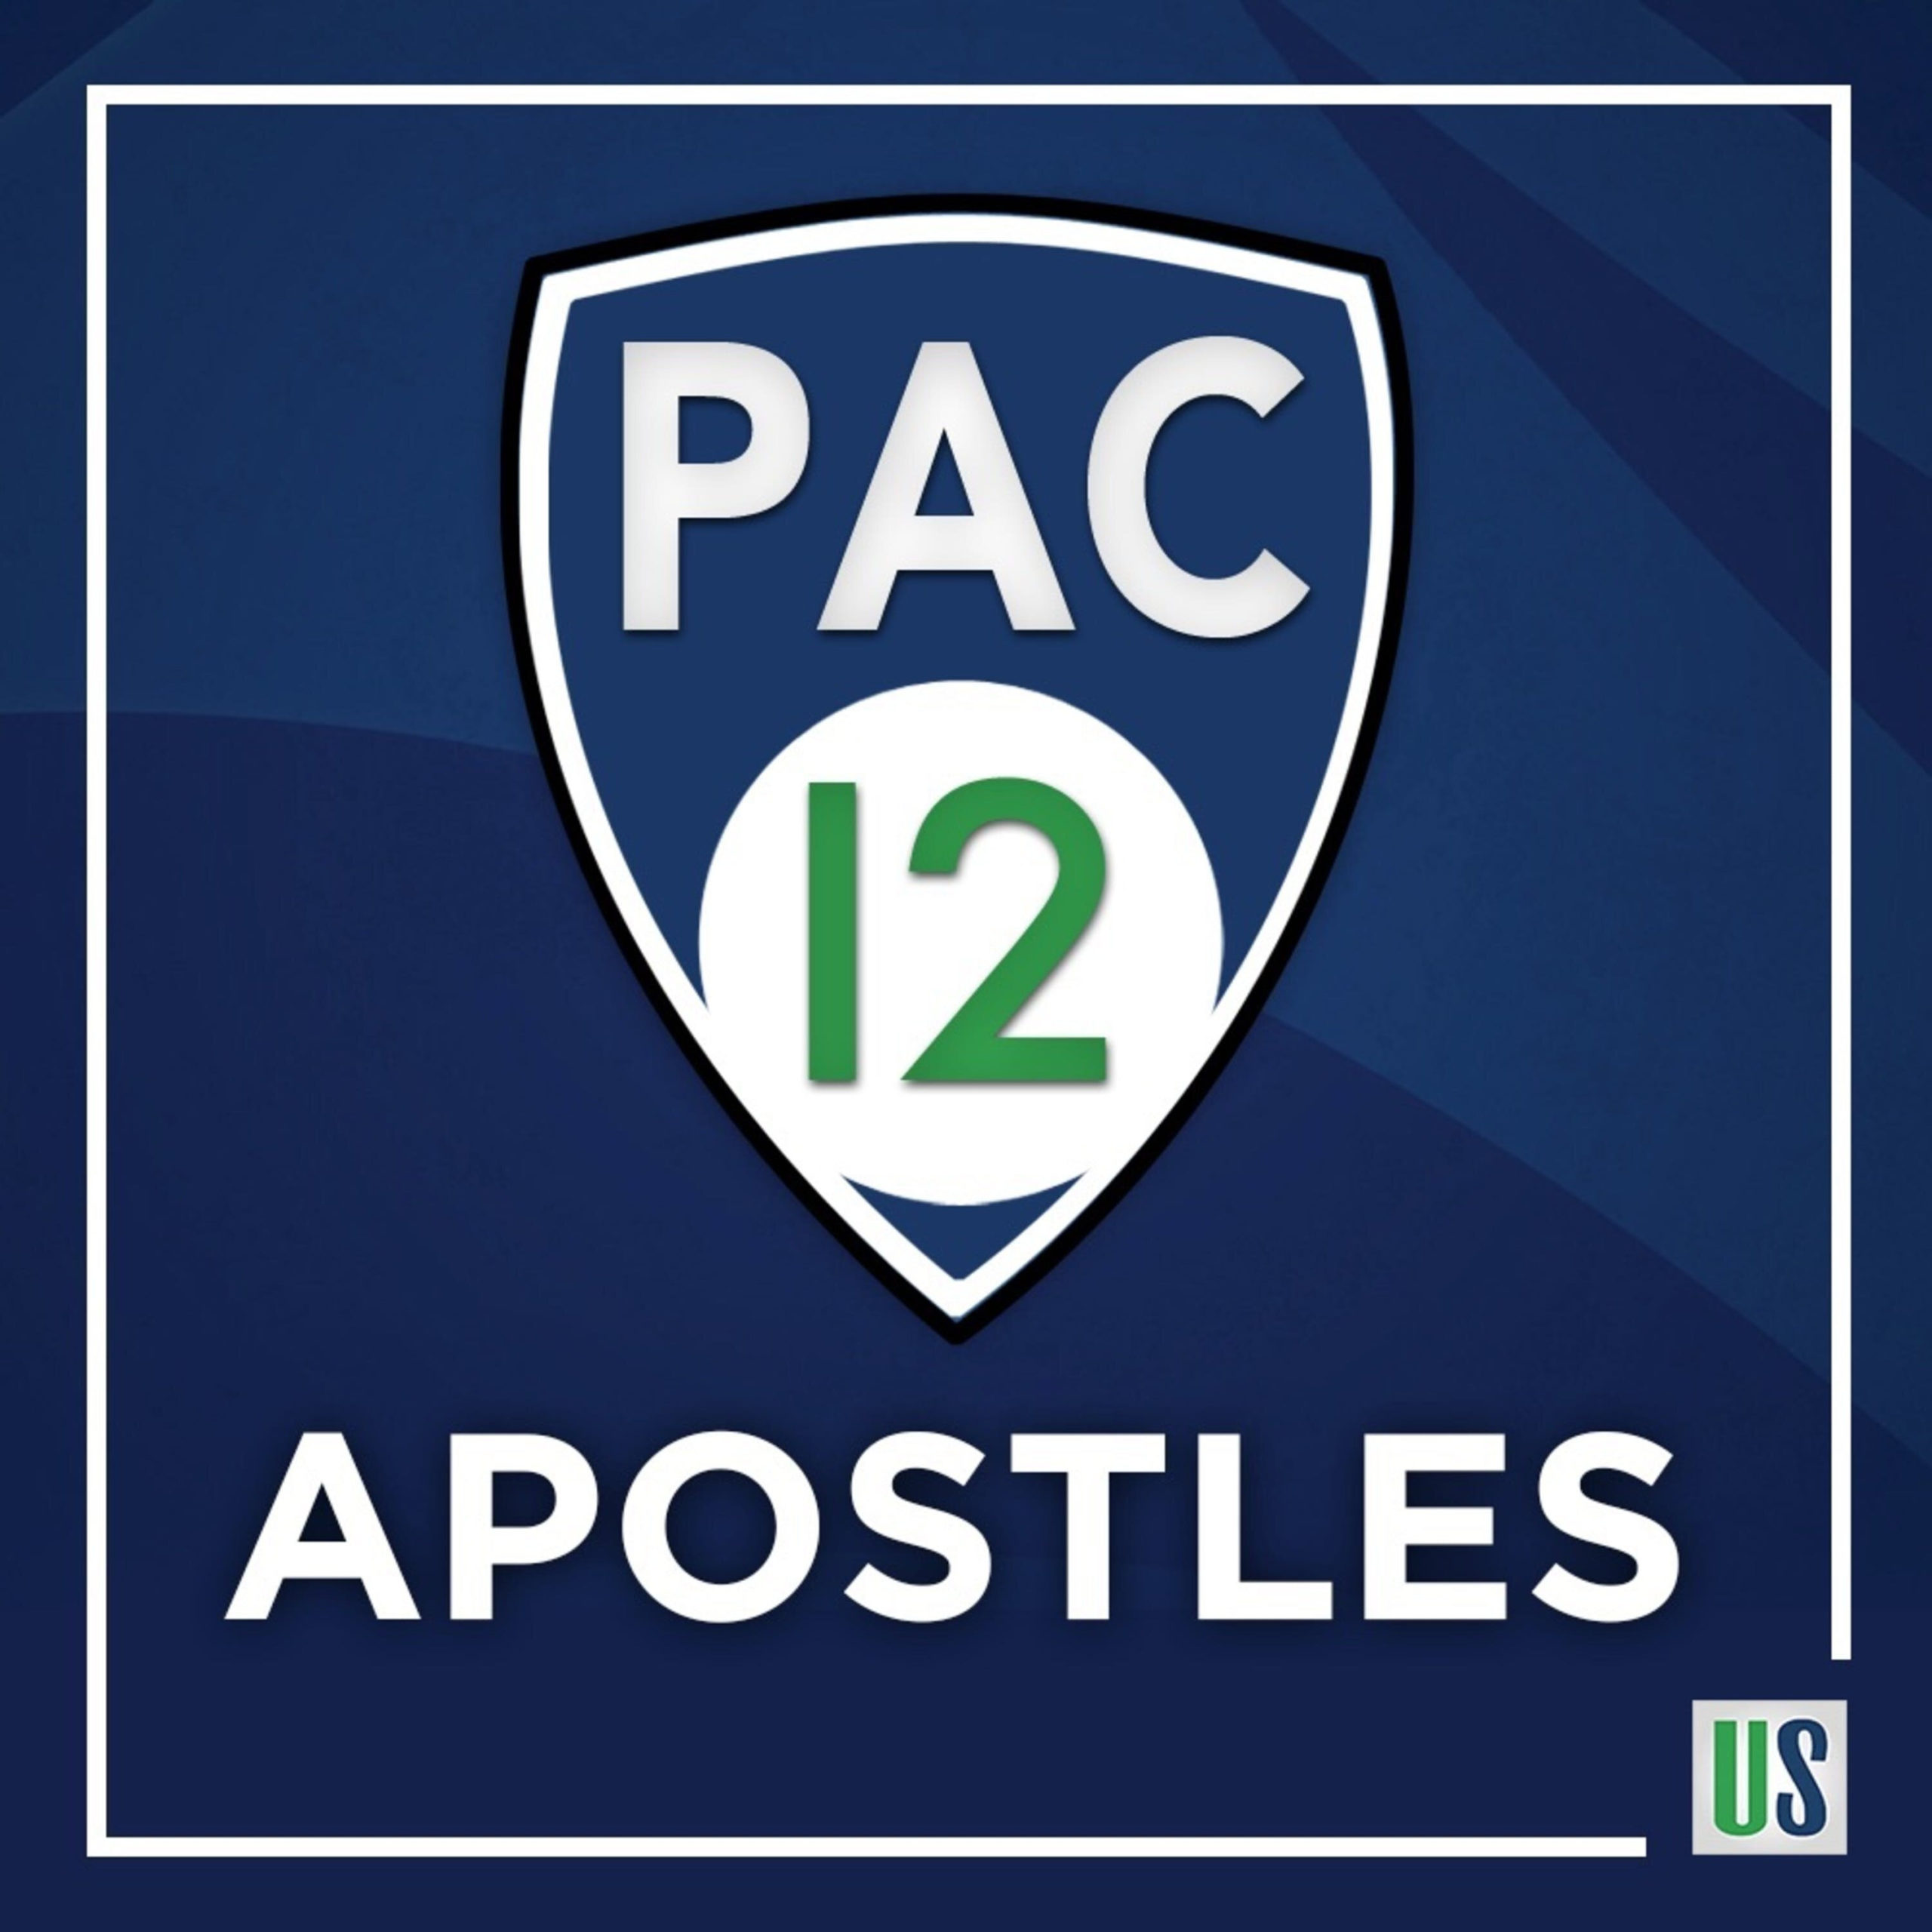 Pac-12 Apostles Podcast (3/1/2023): Reaction to Deion Sanders Comments, Is the Pac-12 on its Death Bed? 2023 Heisman Odds, Plus Our Take on Jaden Rashada